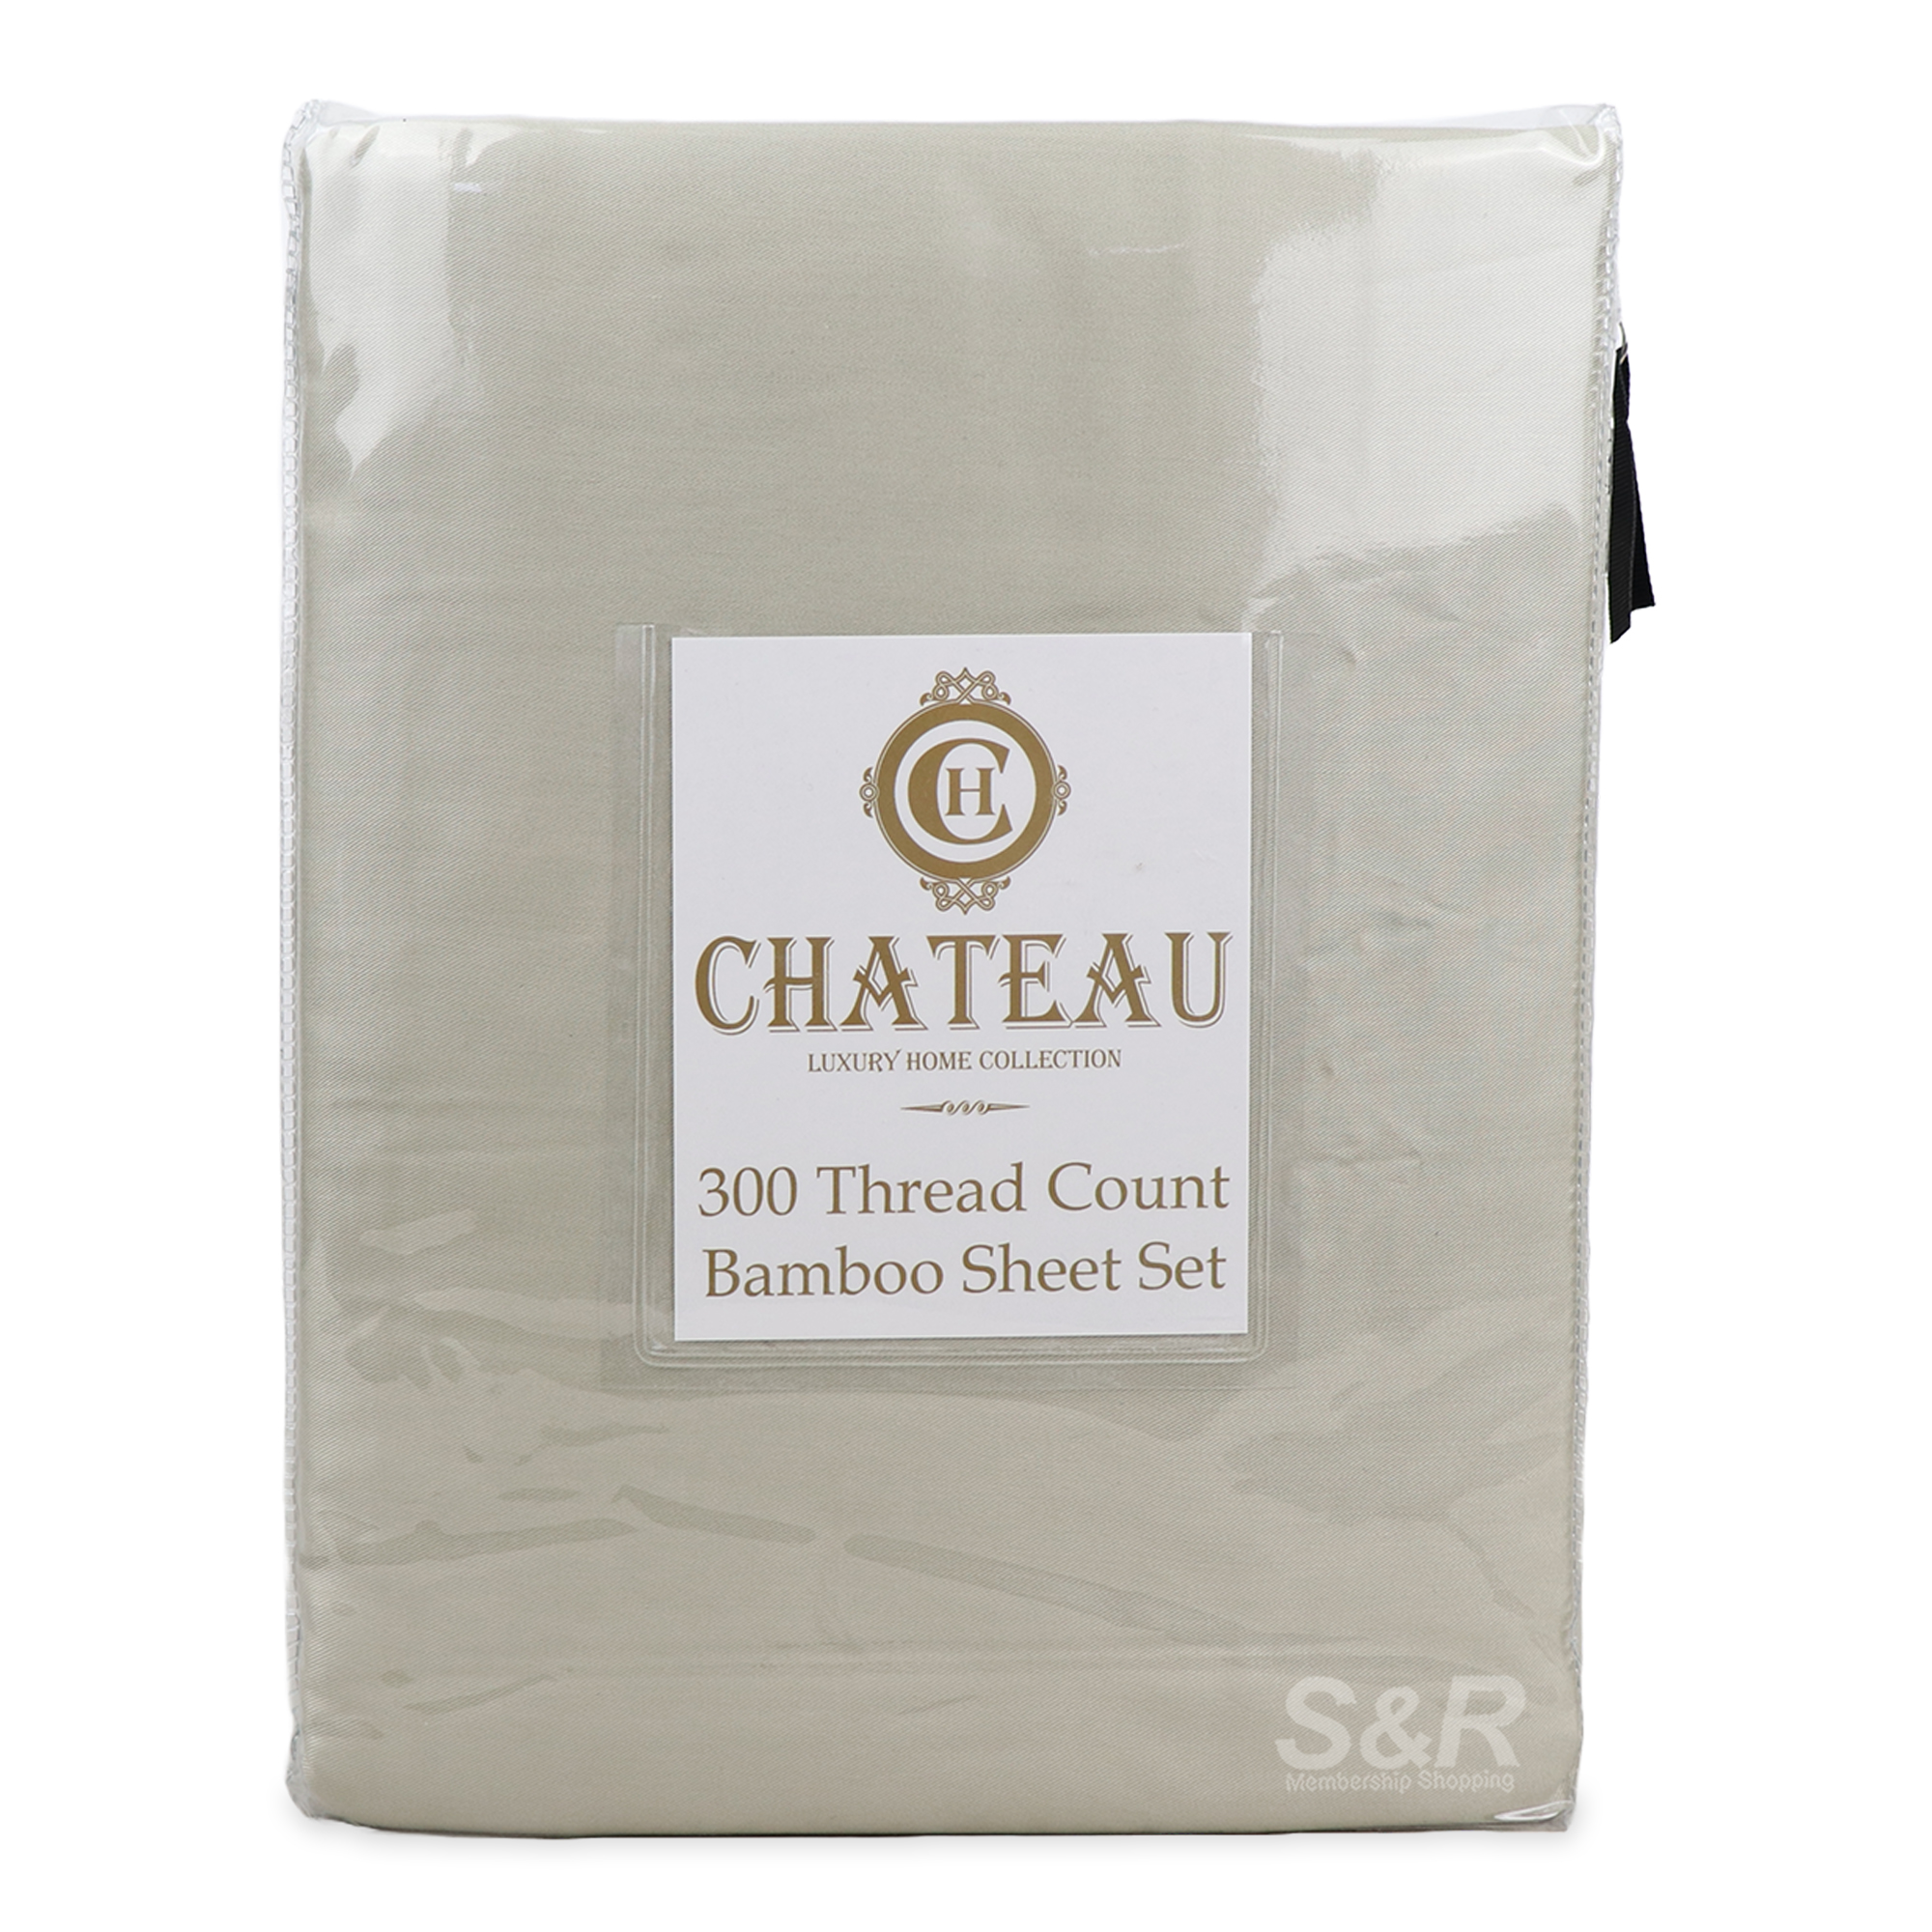 Chateau 300 Thread Count Bamboo Sheet Set King